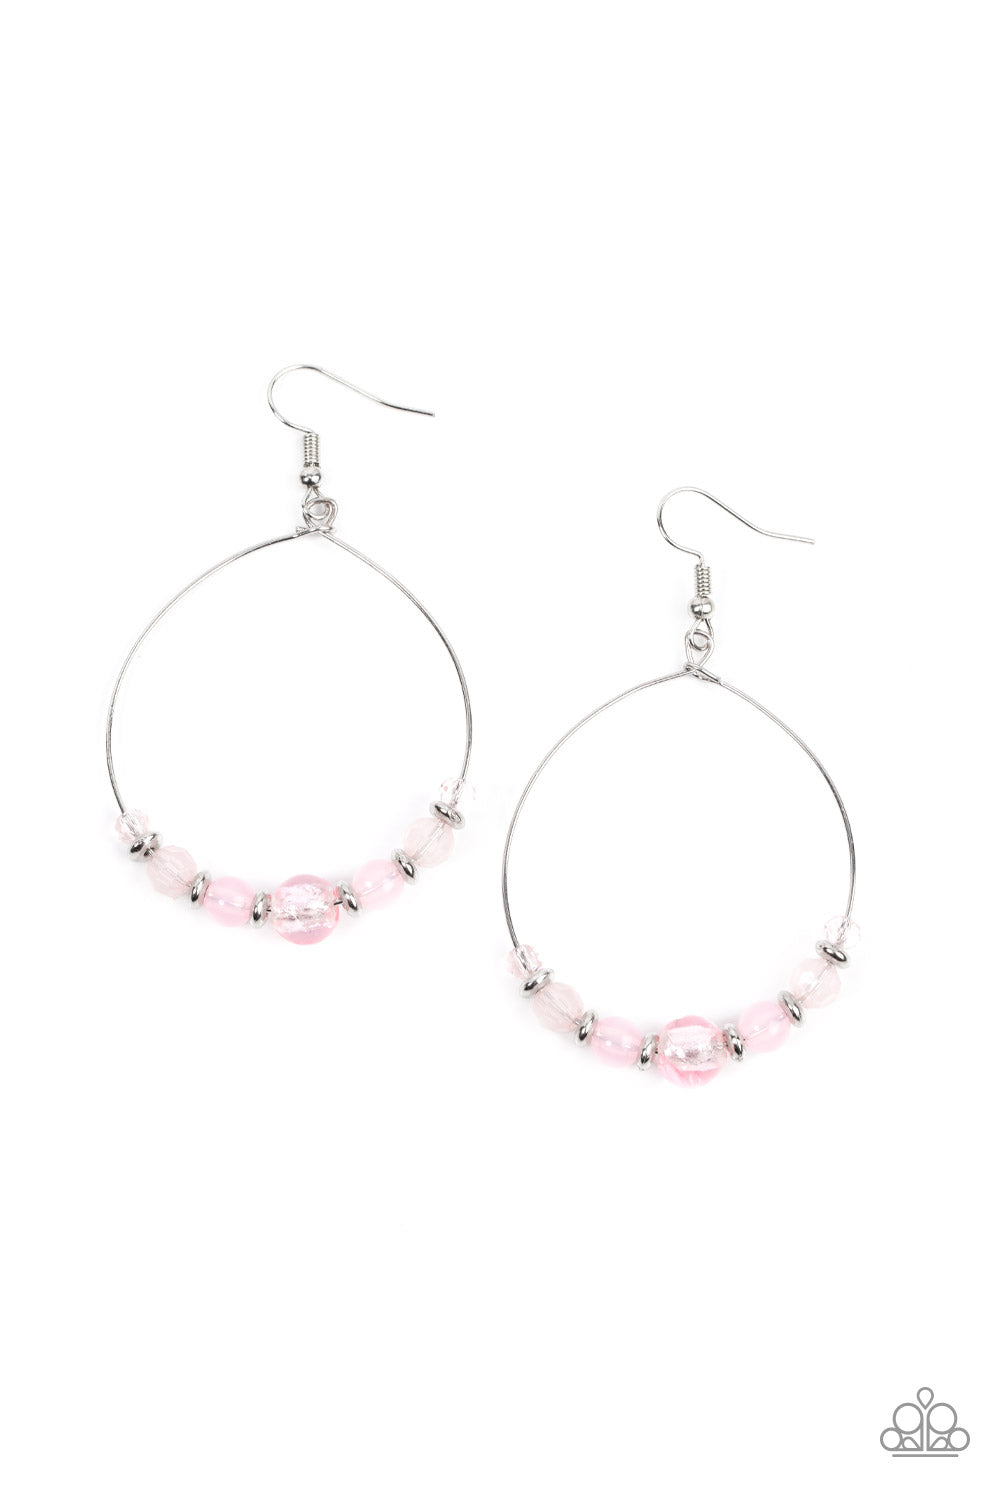 Ambient Afterglow Pink Earring - Paparazzi Accessories  Infused with dainty silver accents, opaque and glassy pink beads glide along a wire hoop for an ethereal pop of color. Earring attaches to a standard fishhook fitting.  Sold as one pair of earrings.